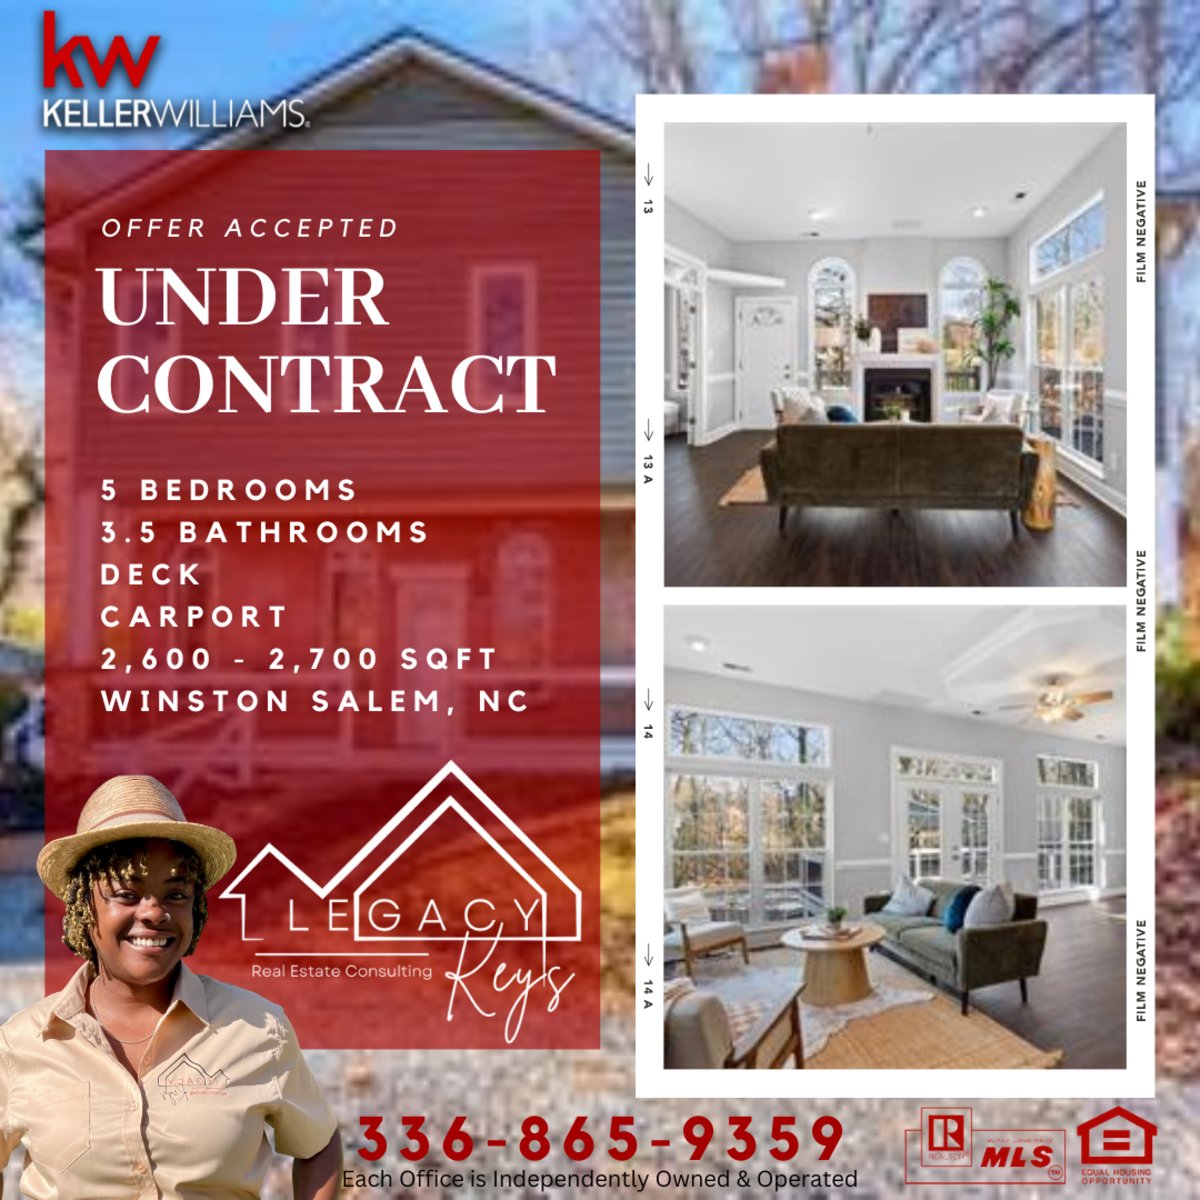 The UNIQUENESS of this property has SO much CHARACTER and STYLE! Overwhelmed with happiness for these buyers!

#OfferAccepted #UnderContract #Relocation #MovingToNC #NCHomes #BuyersAgent